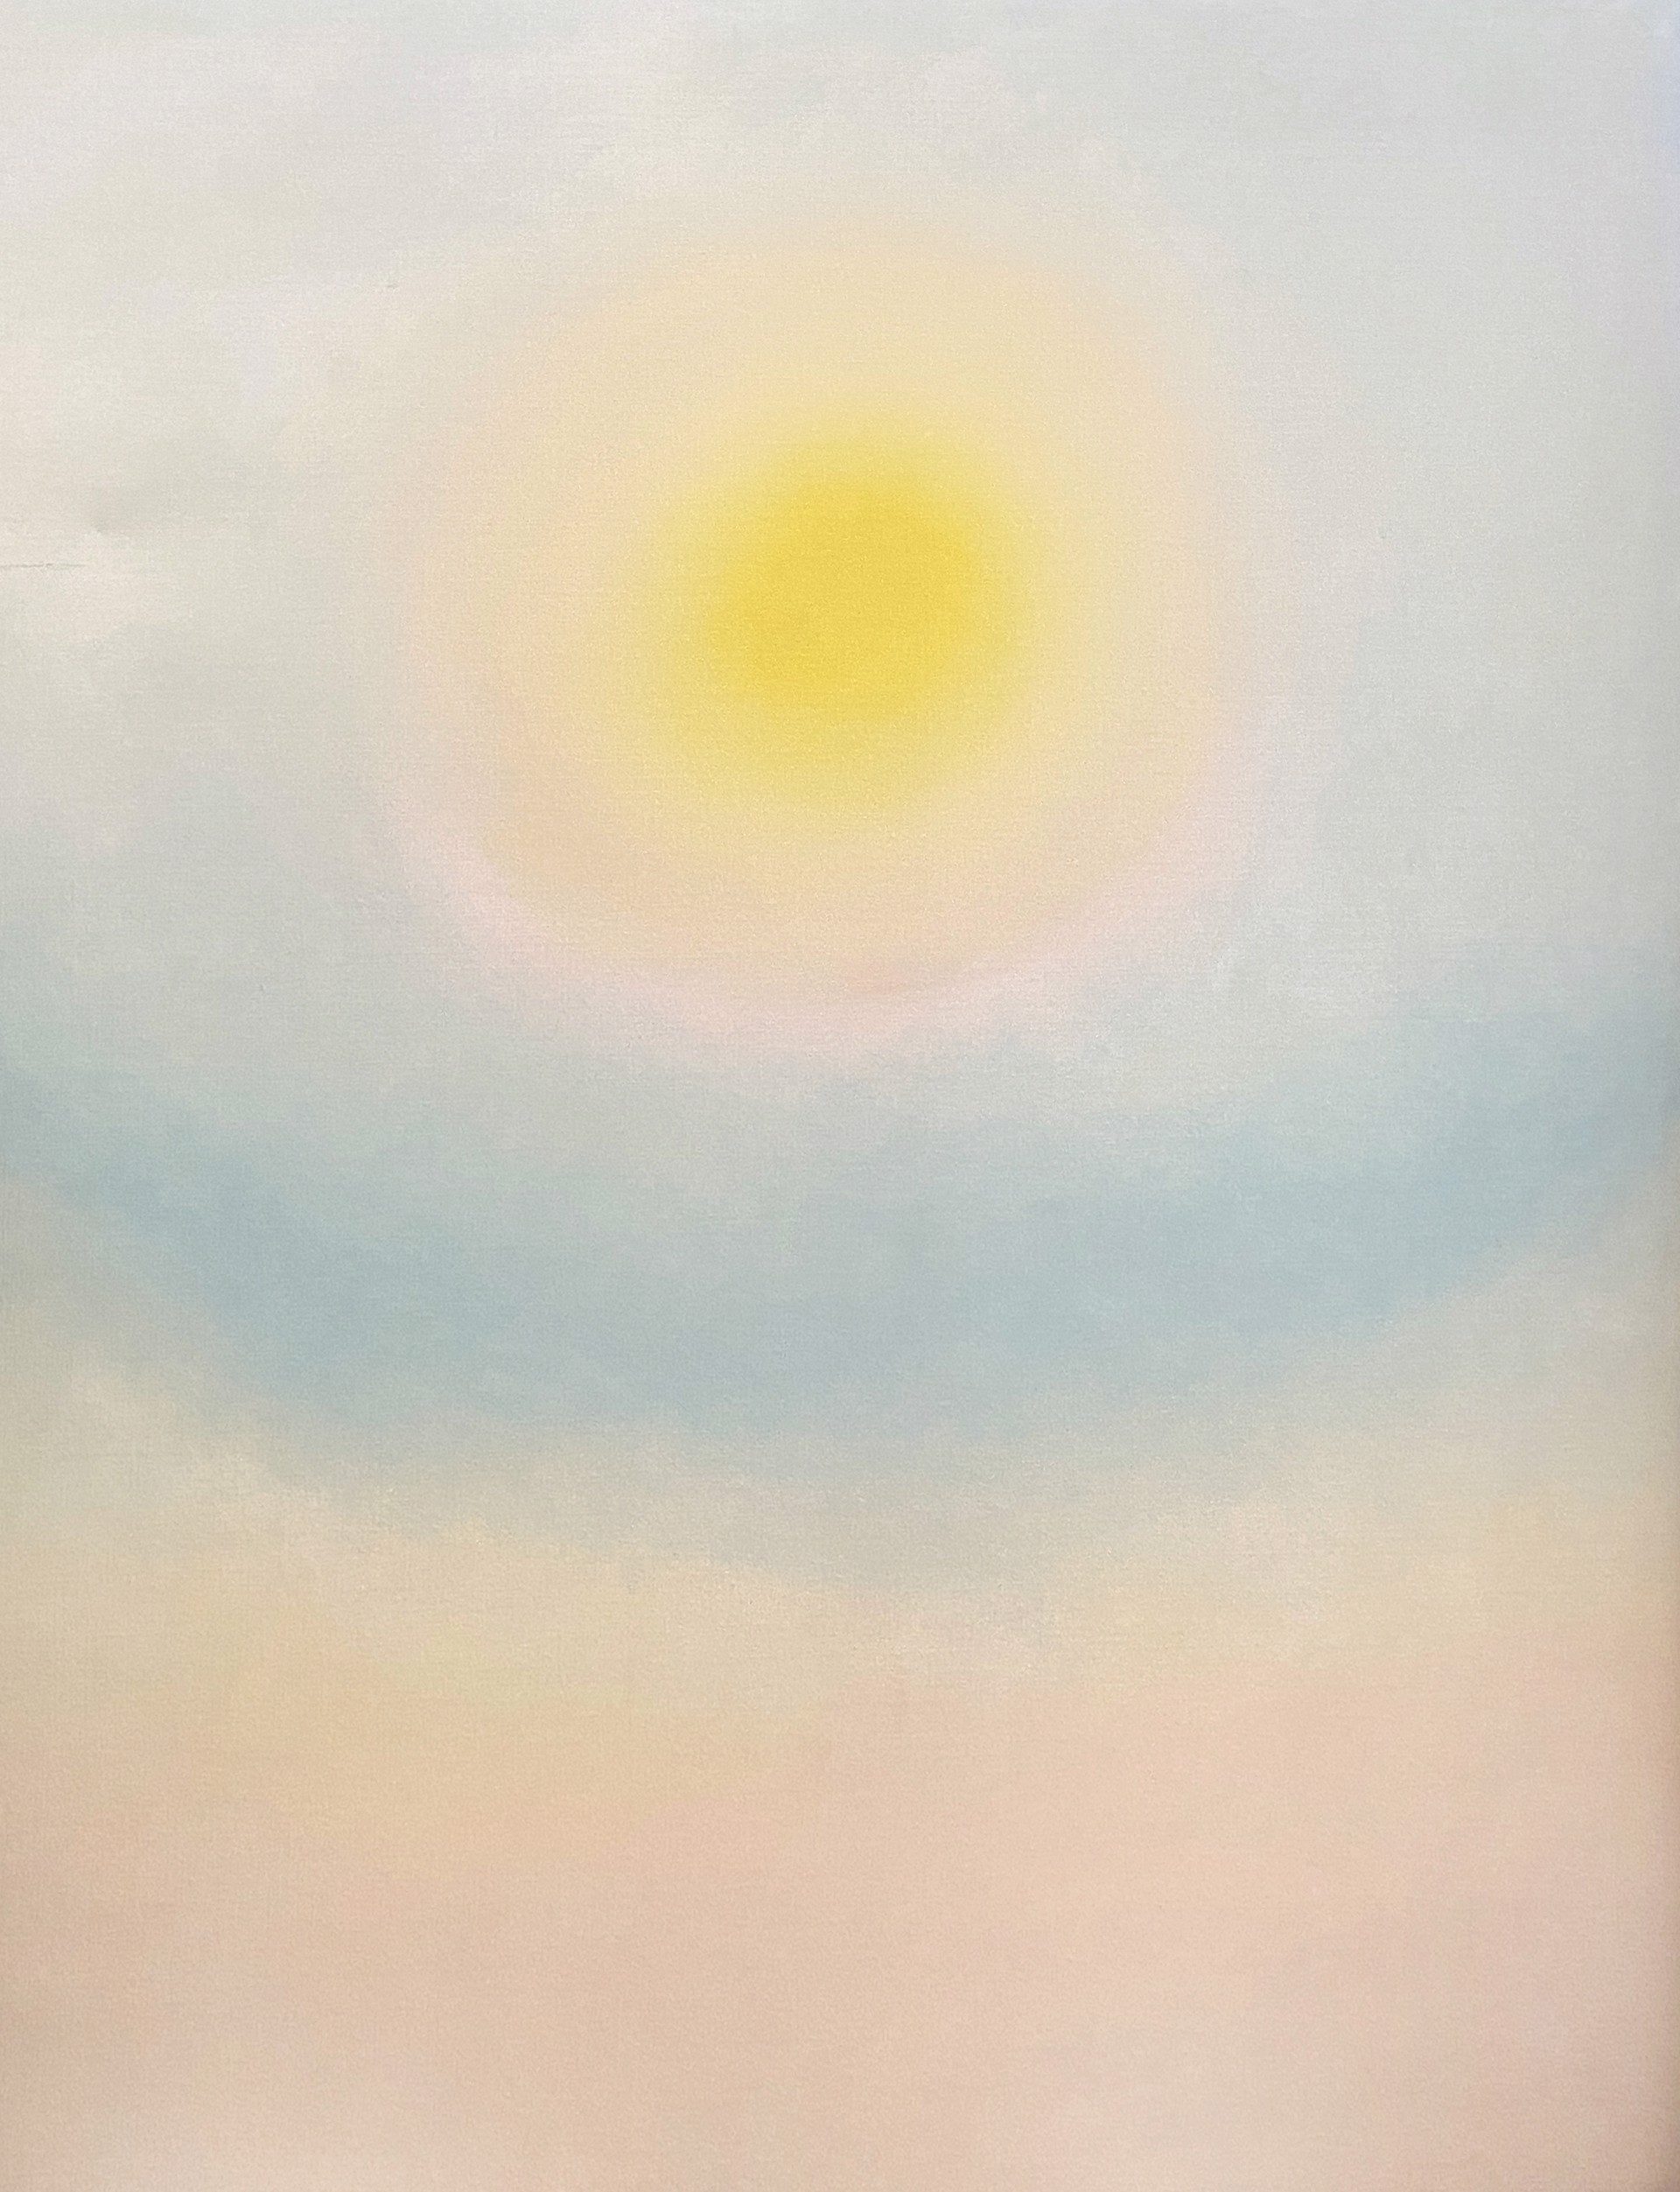 Sun in a Pale Sky by Leila McConnell